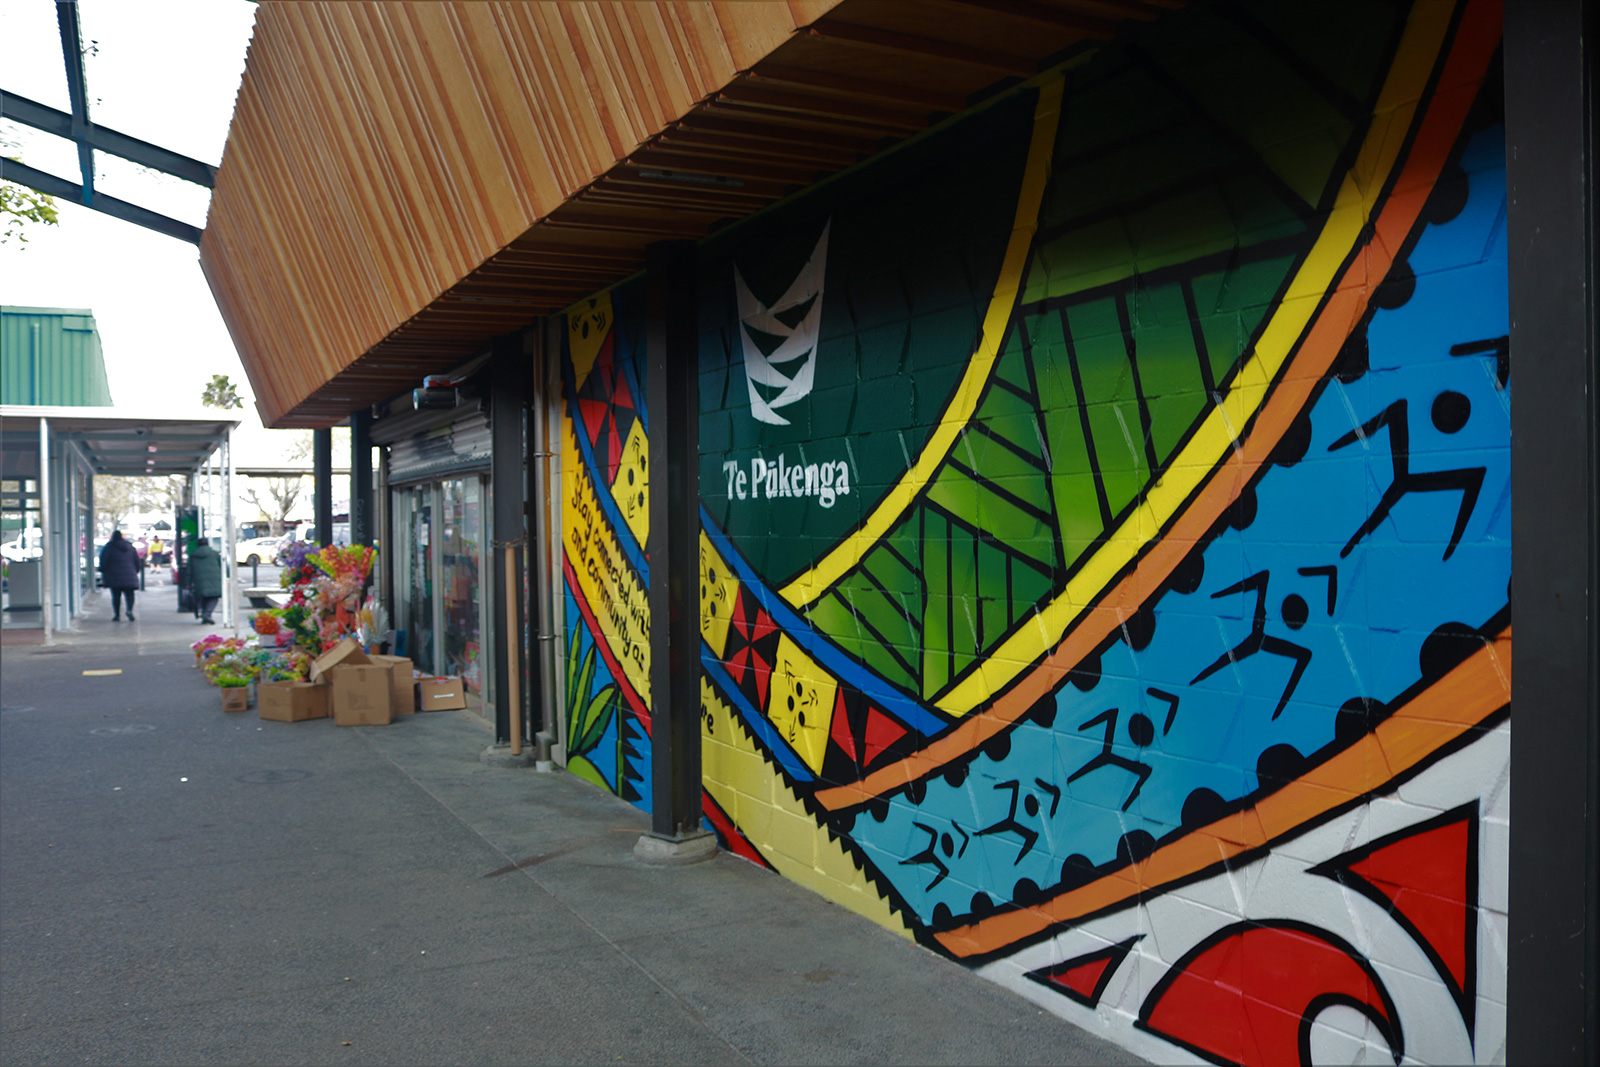 Image of a building that has a colourful mural depicting multicultural patterns with Te Pūkenga logo at the top and centre. The image has been taken to the right of the mural and in the distance there is a flower shop with flowers and cardboard boxed outside.